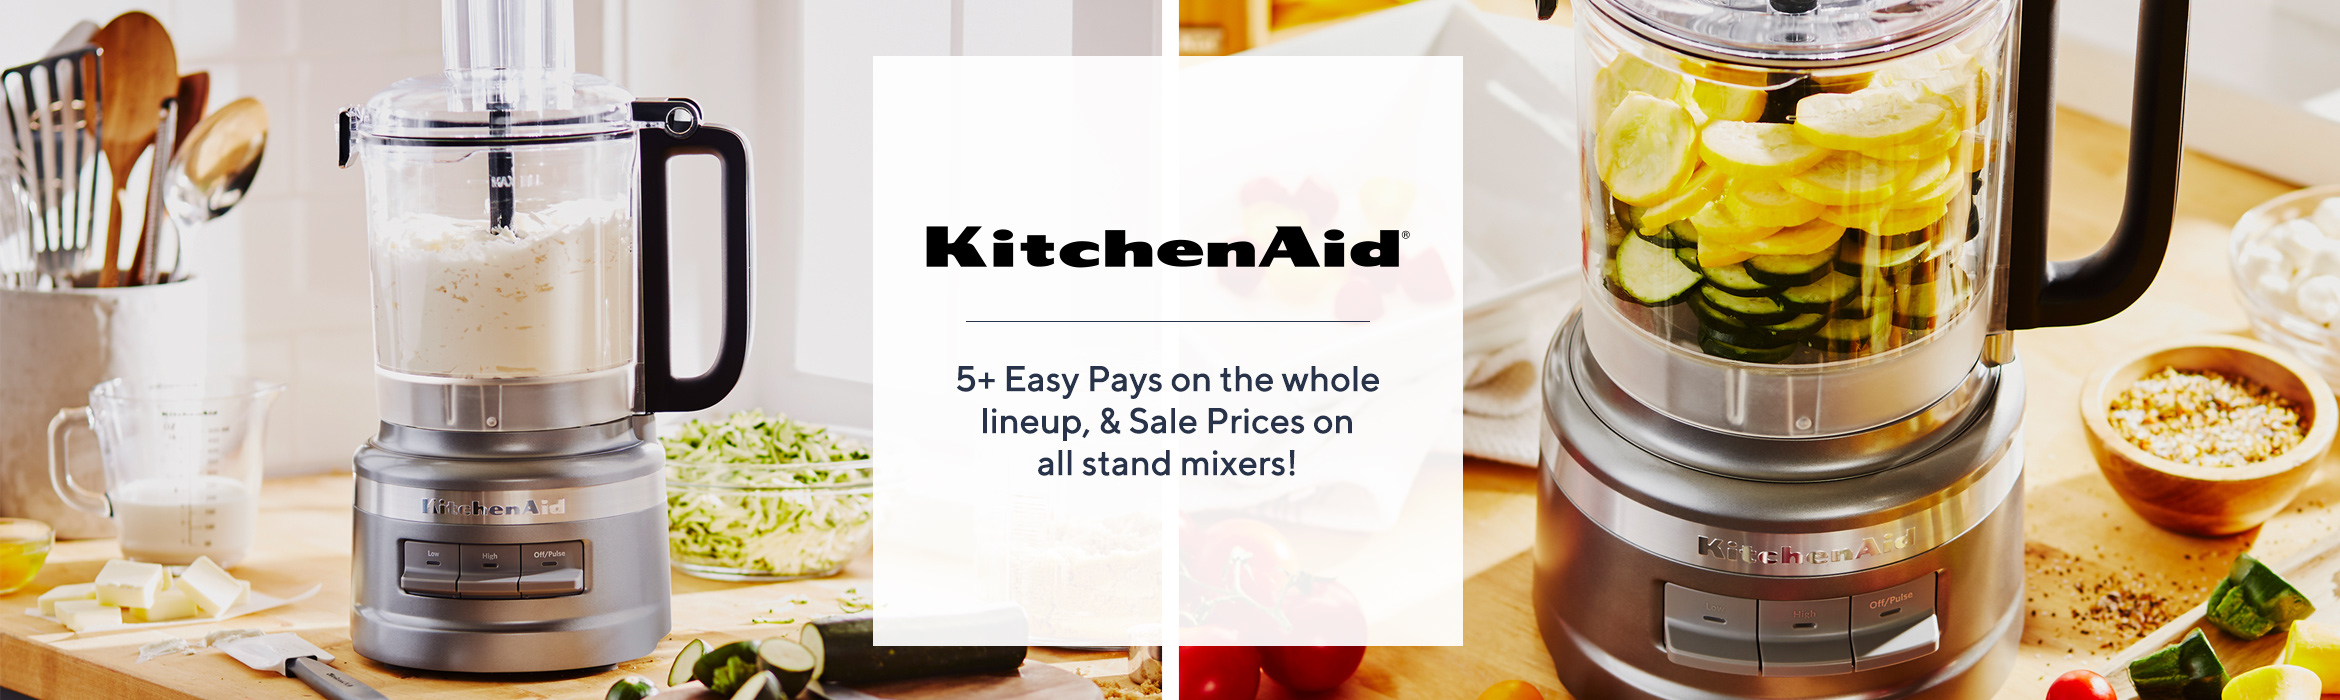 KitchenAid 5+ Easy Pays on the whole lineup, & Sale Prices on all stand mixers!